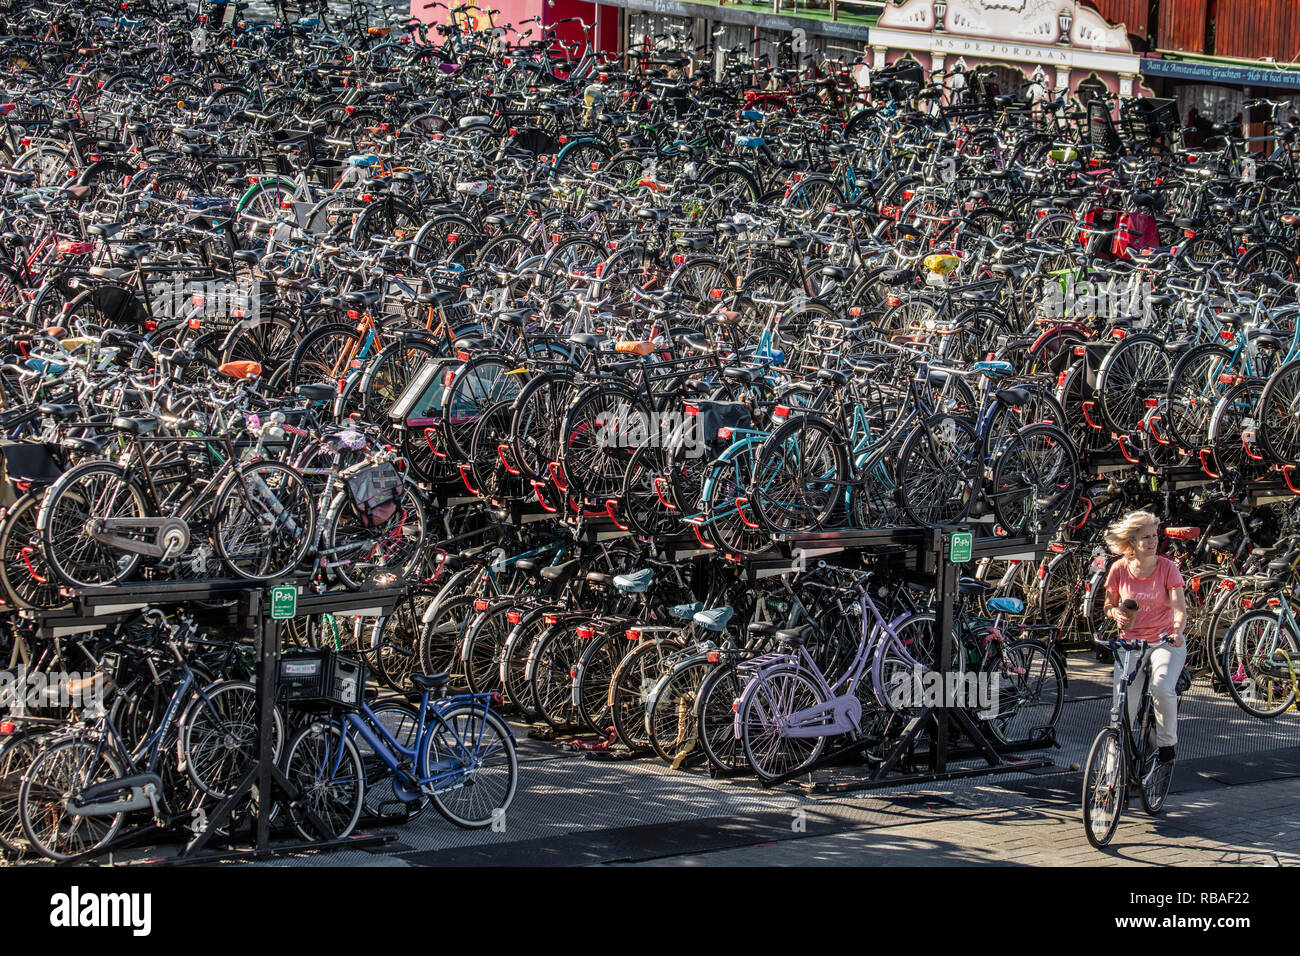 The Netherlands, Amsterdam, Central station, bicycle storage or parking. Stock Photo